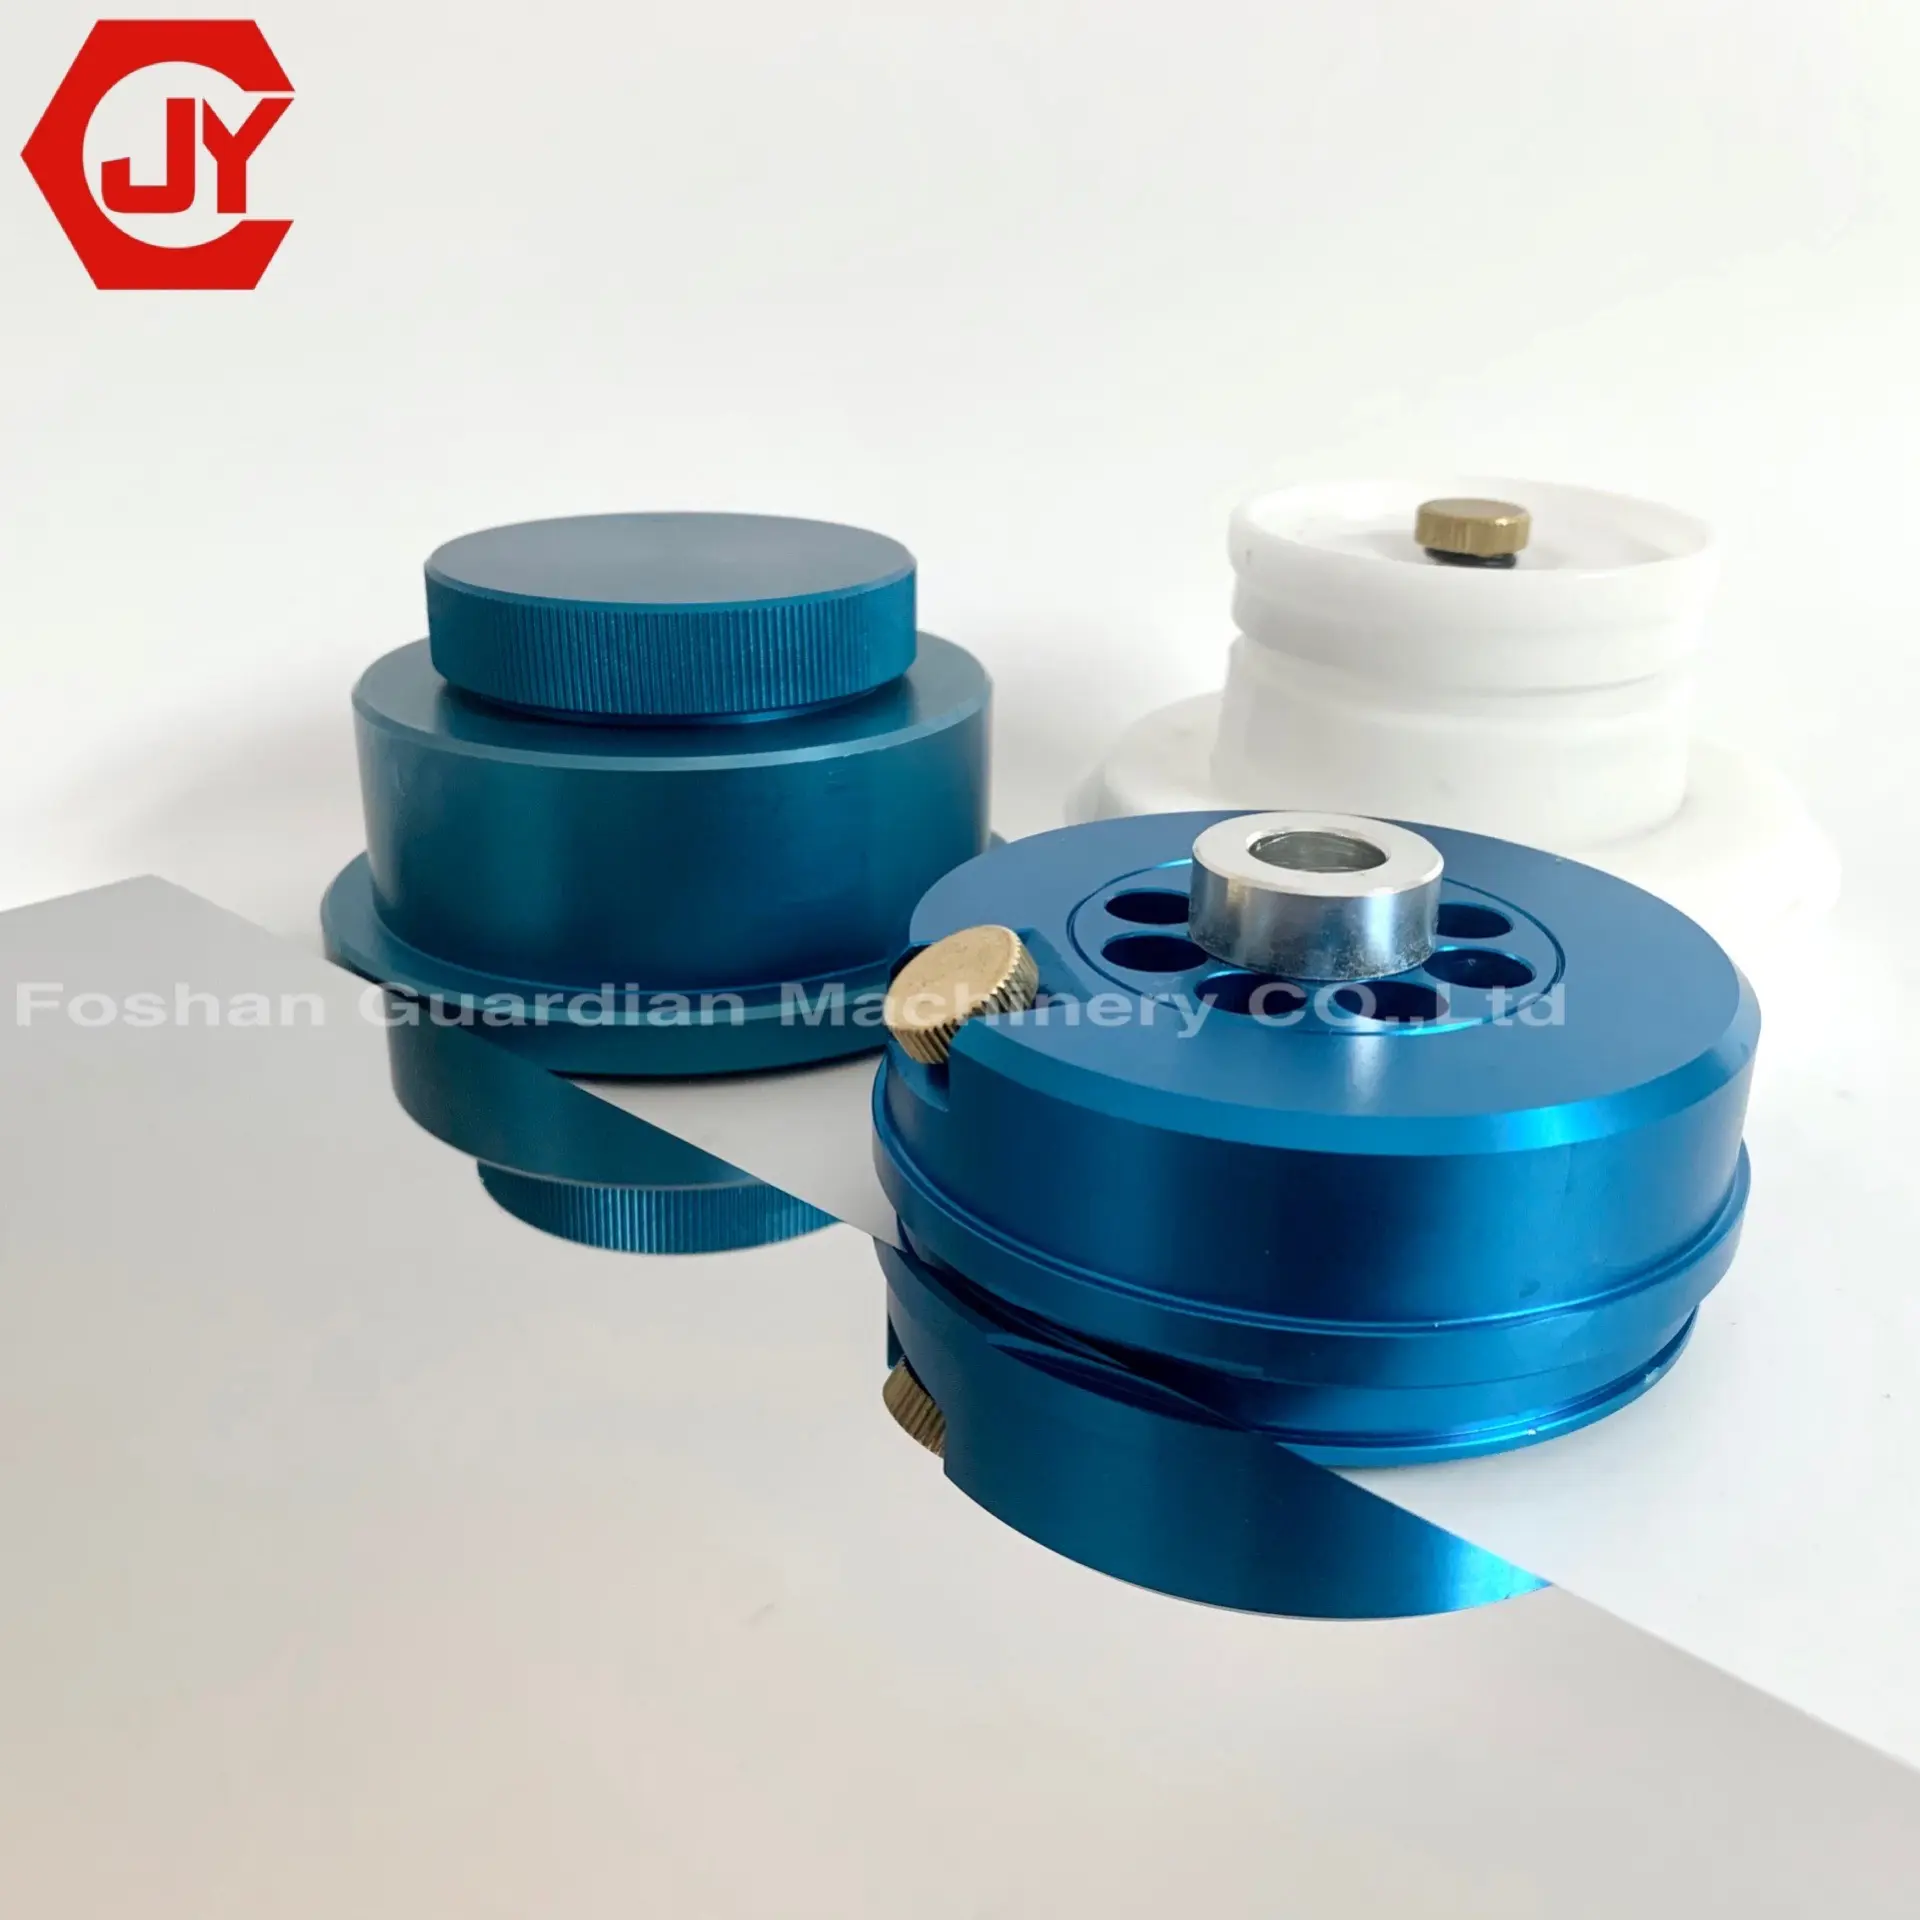 Ink Cup Ring Pad Printing Machine Ink Cup Ceramic Ring for Pad Printer Doctor Blade